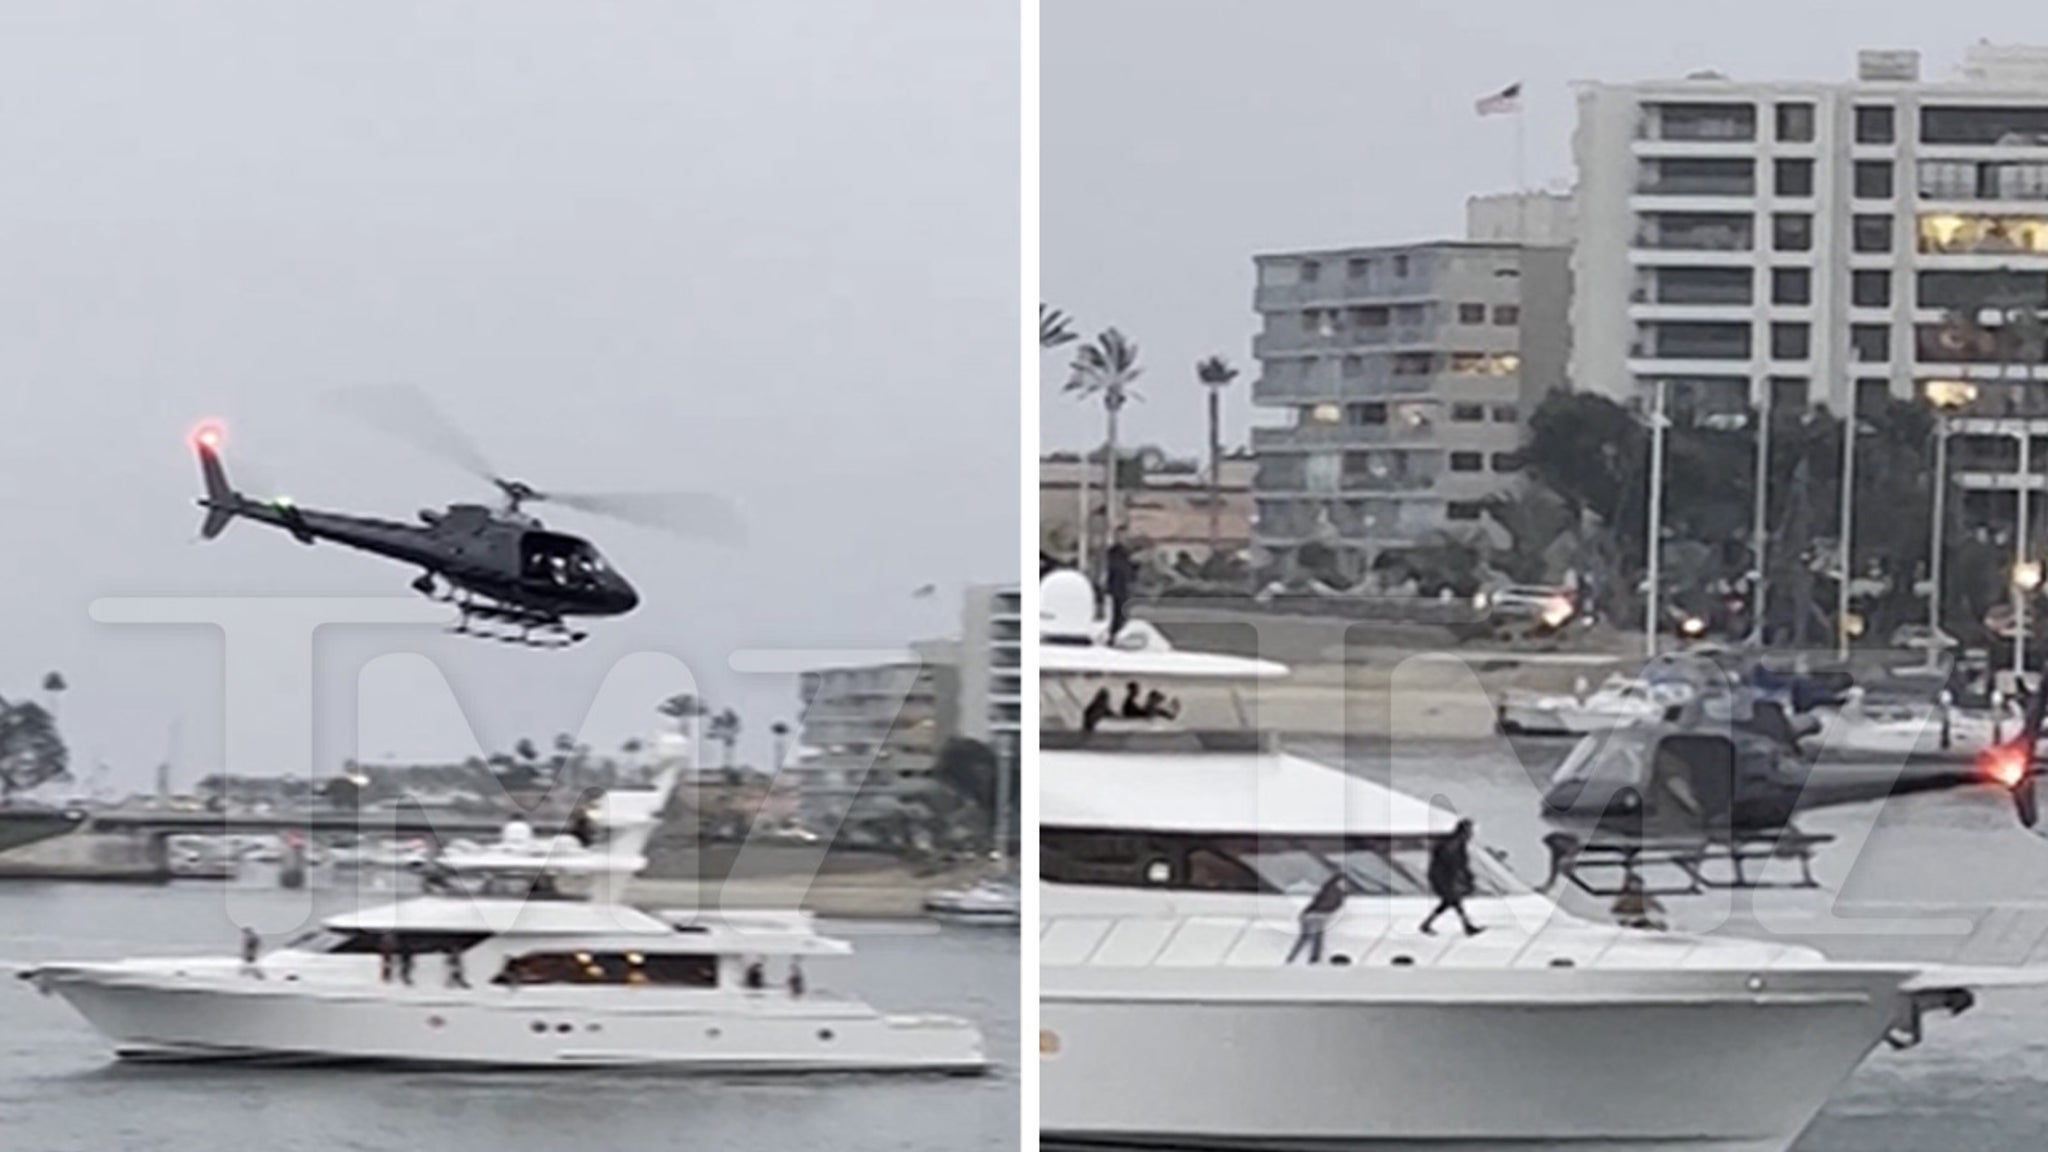 Navy Seals Perform Helicopter Raid Demonstration On Yacht, Crazy Video thumbnail